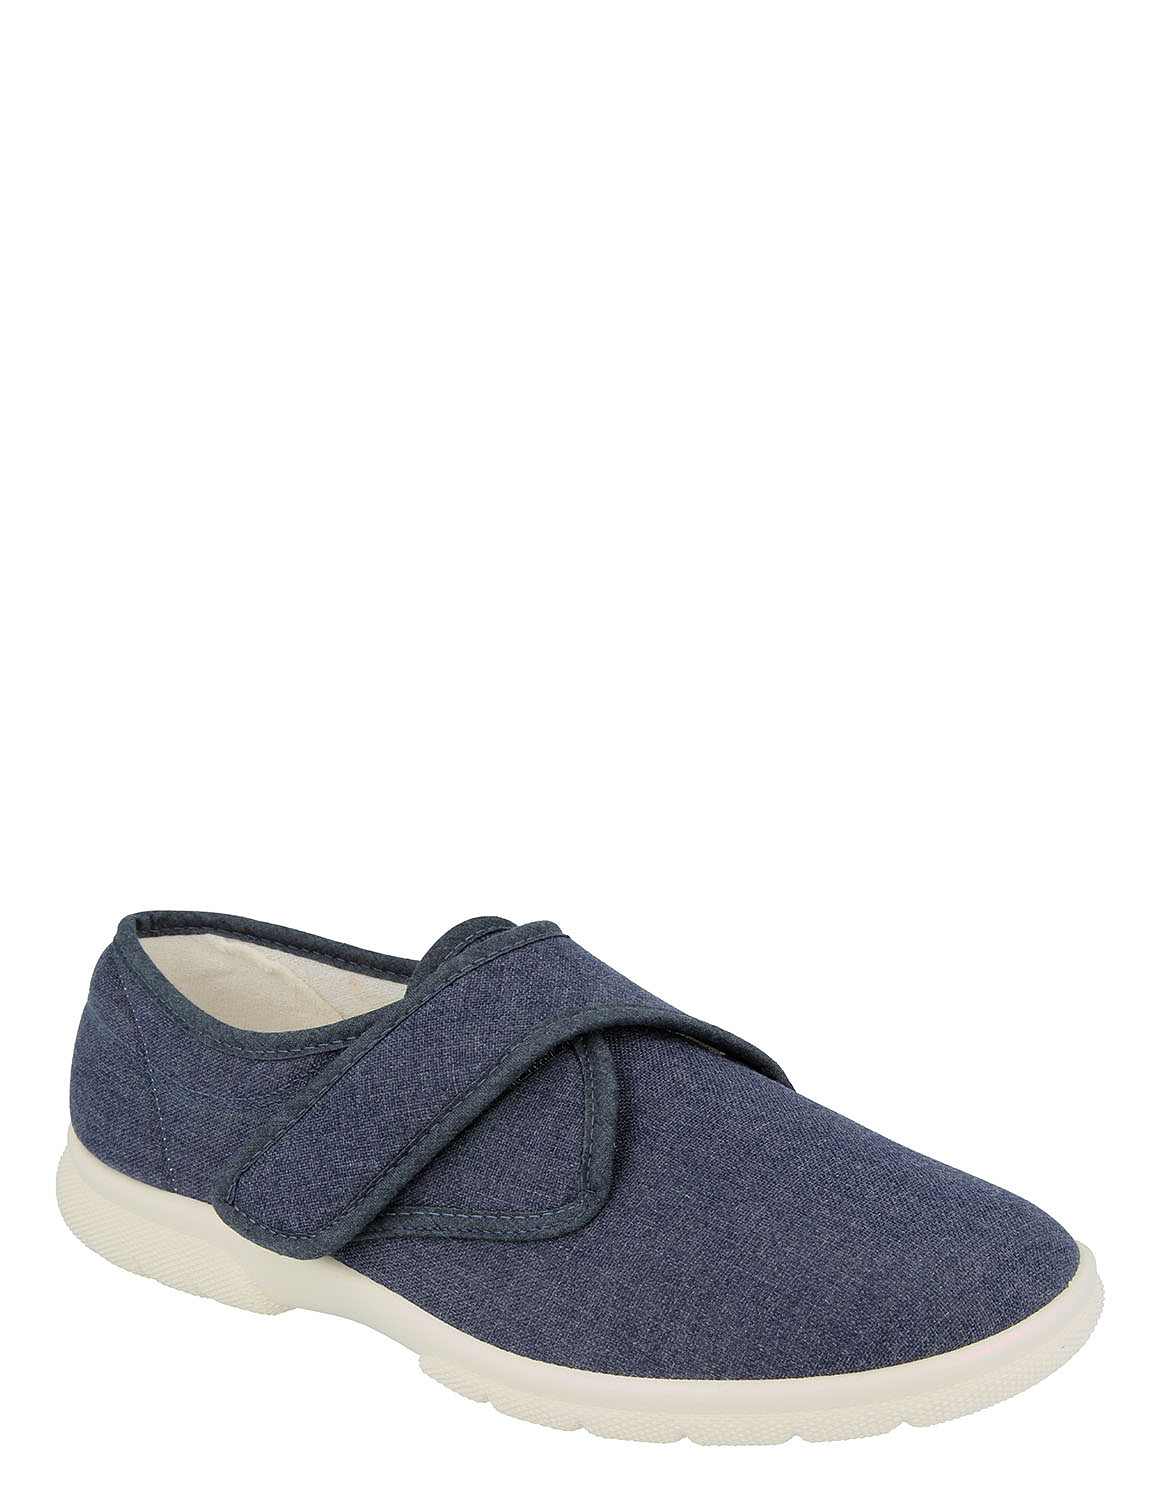 Touch Fasten Canvas Extra Wide Ee-4E Db Shoes Cannock | Chums